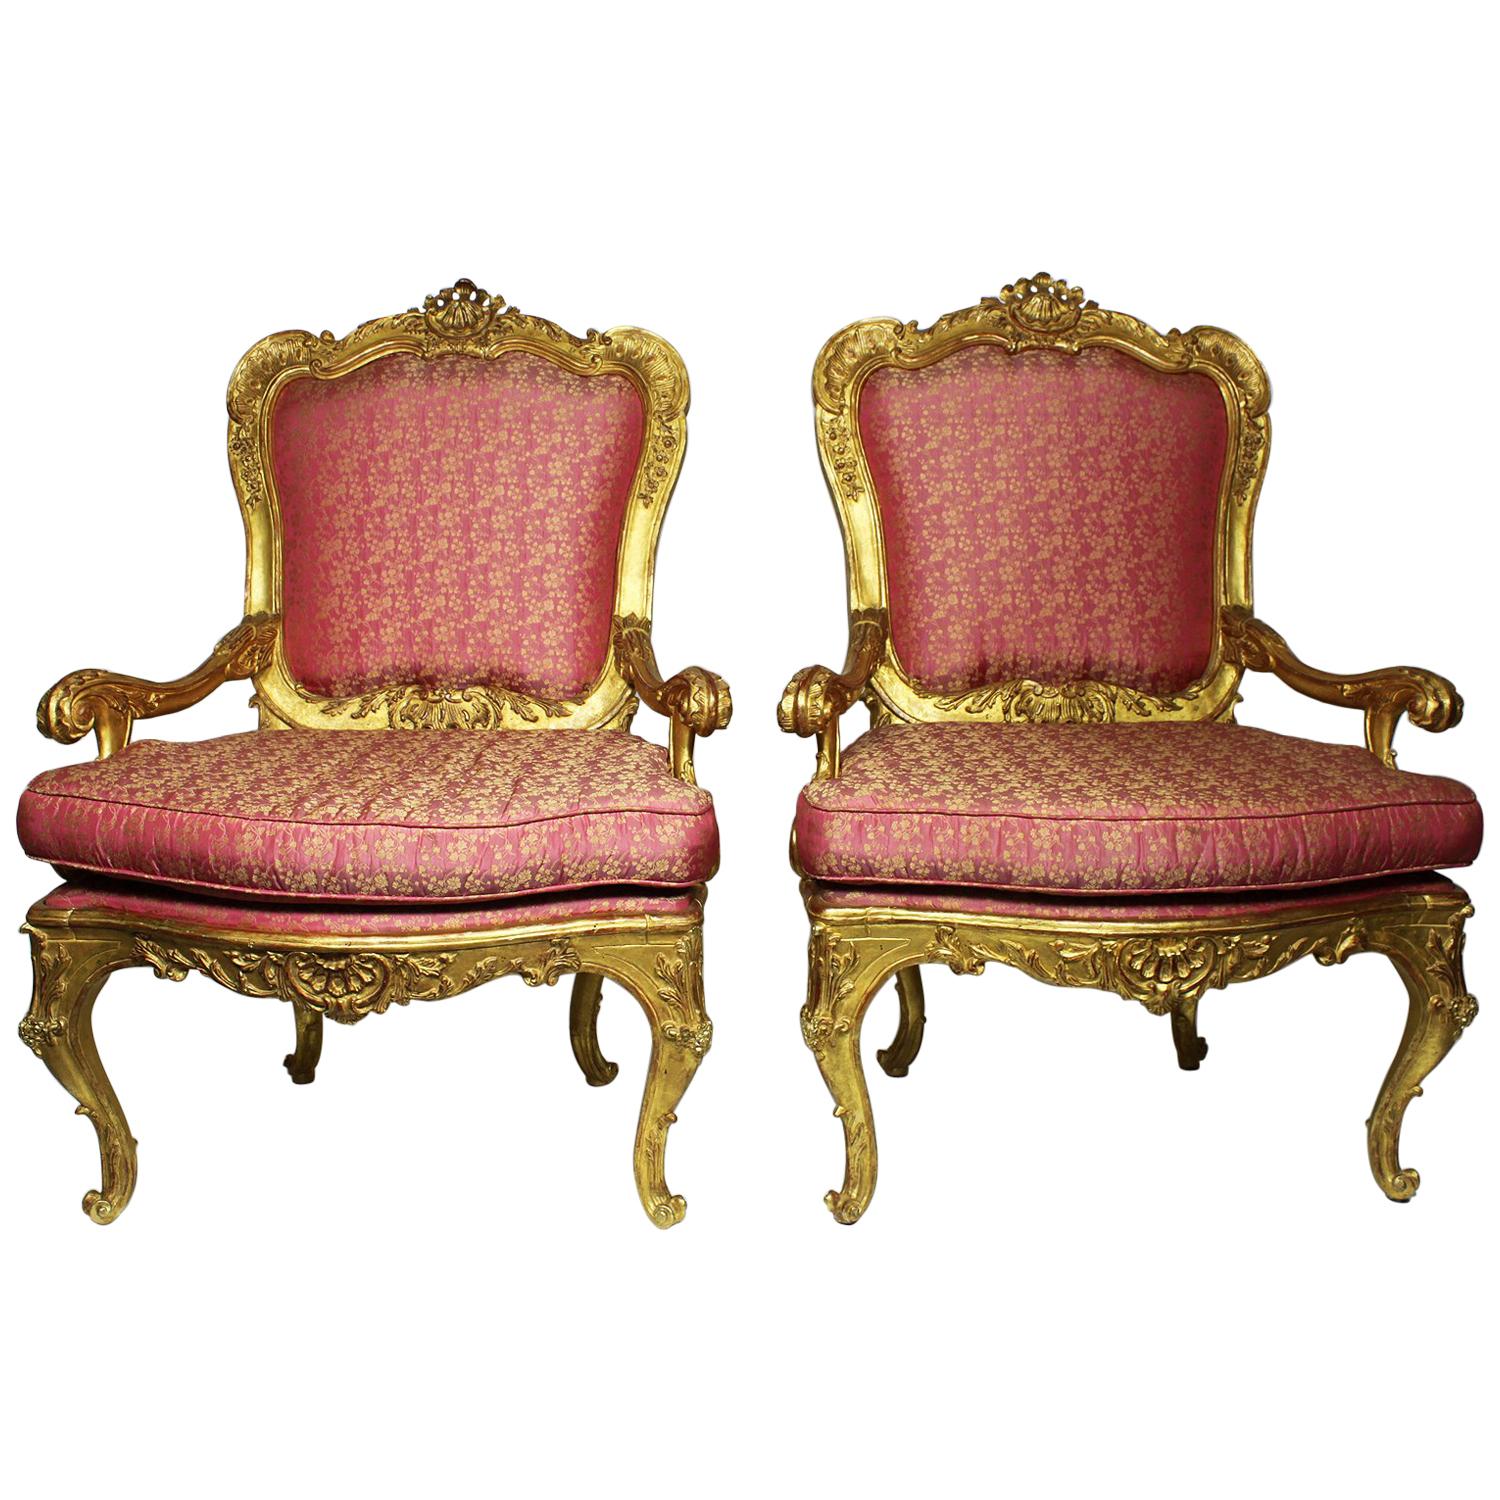 Pair of Italian Venetian Rococo Revival Style Giltwood Carved Throne Armchairs For Sale